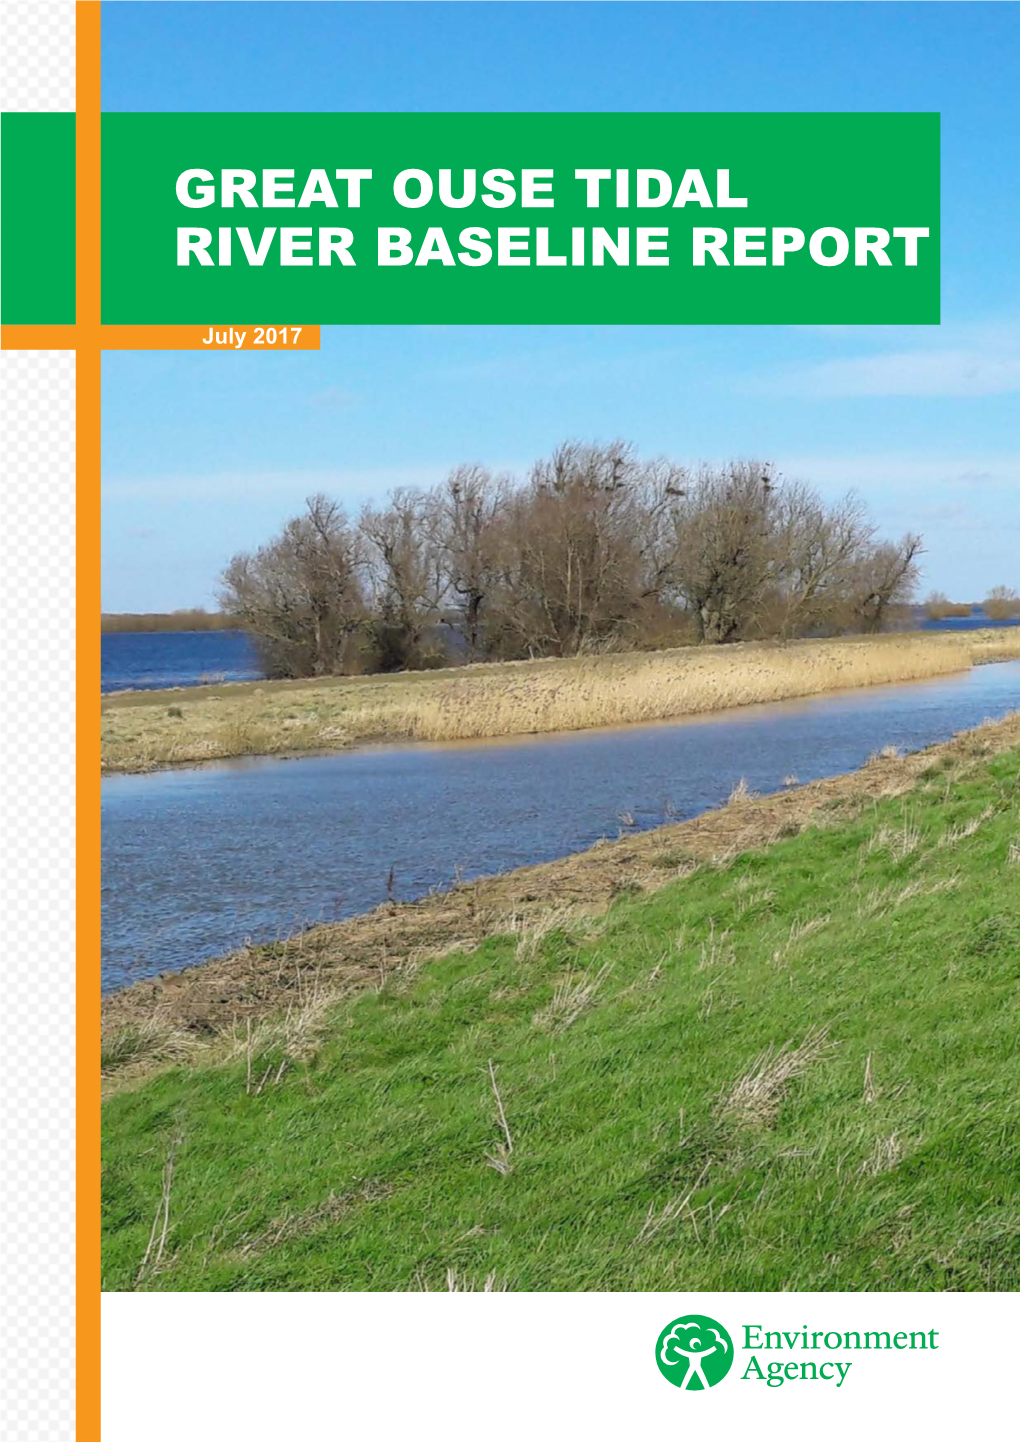 Great Ouse Tidal River Baseline Report